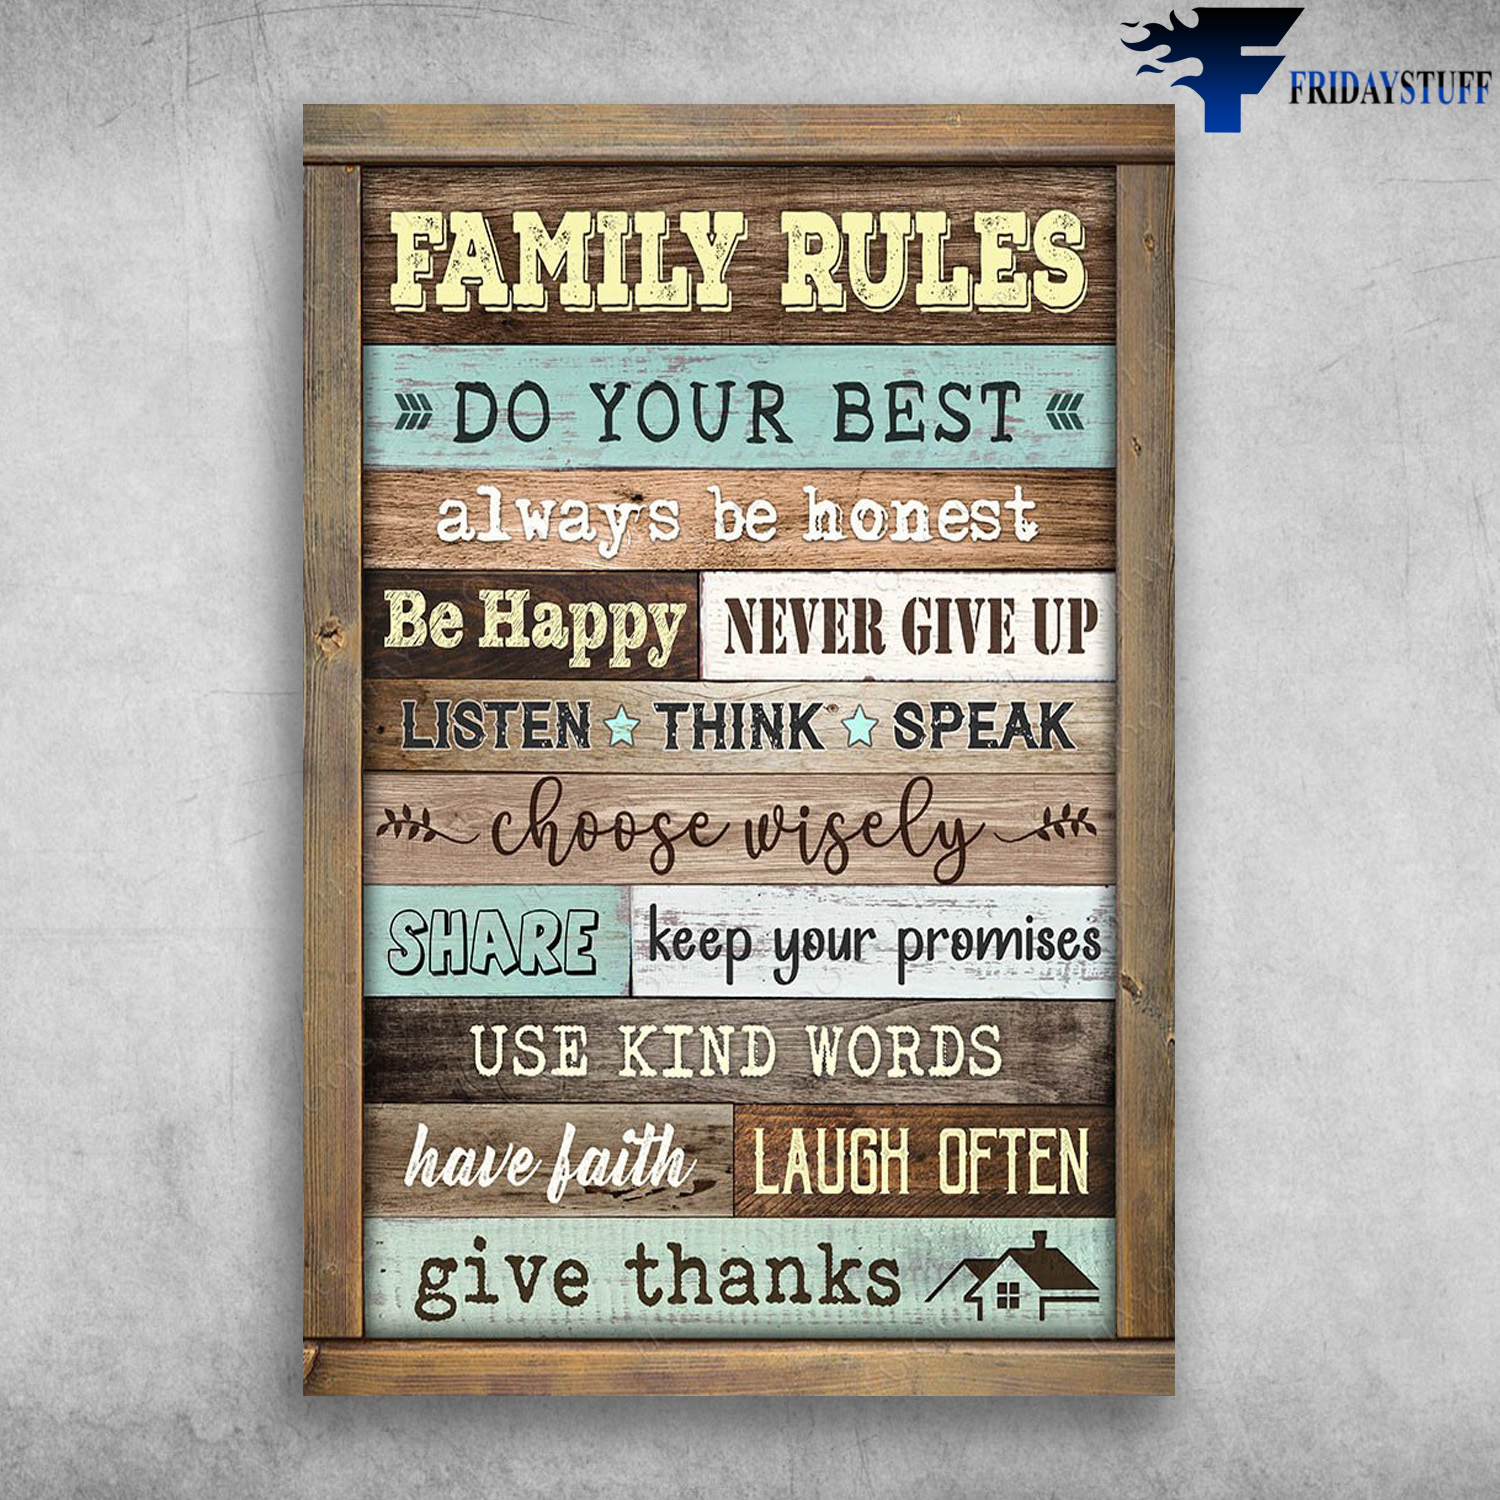 Family Rules - Do Your Best, Always Be Honest, Be Happy, Never Give Up, Listen, Think, Speak, Choose Wisely, Share, Keep Your Promises, Use Kind Words, Have Faith, Laugh Often, Give Thanks